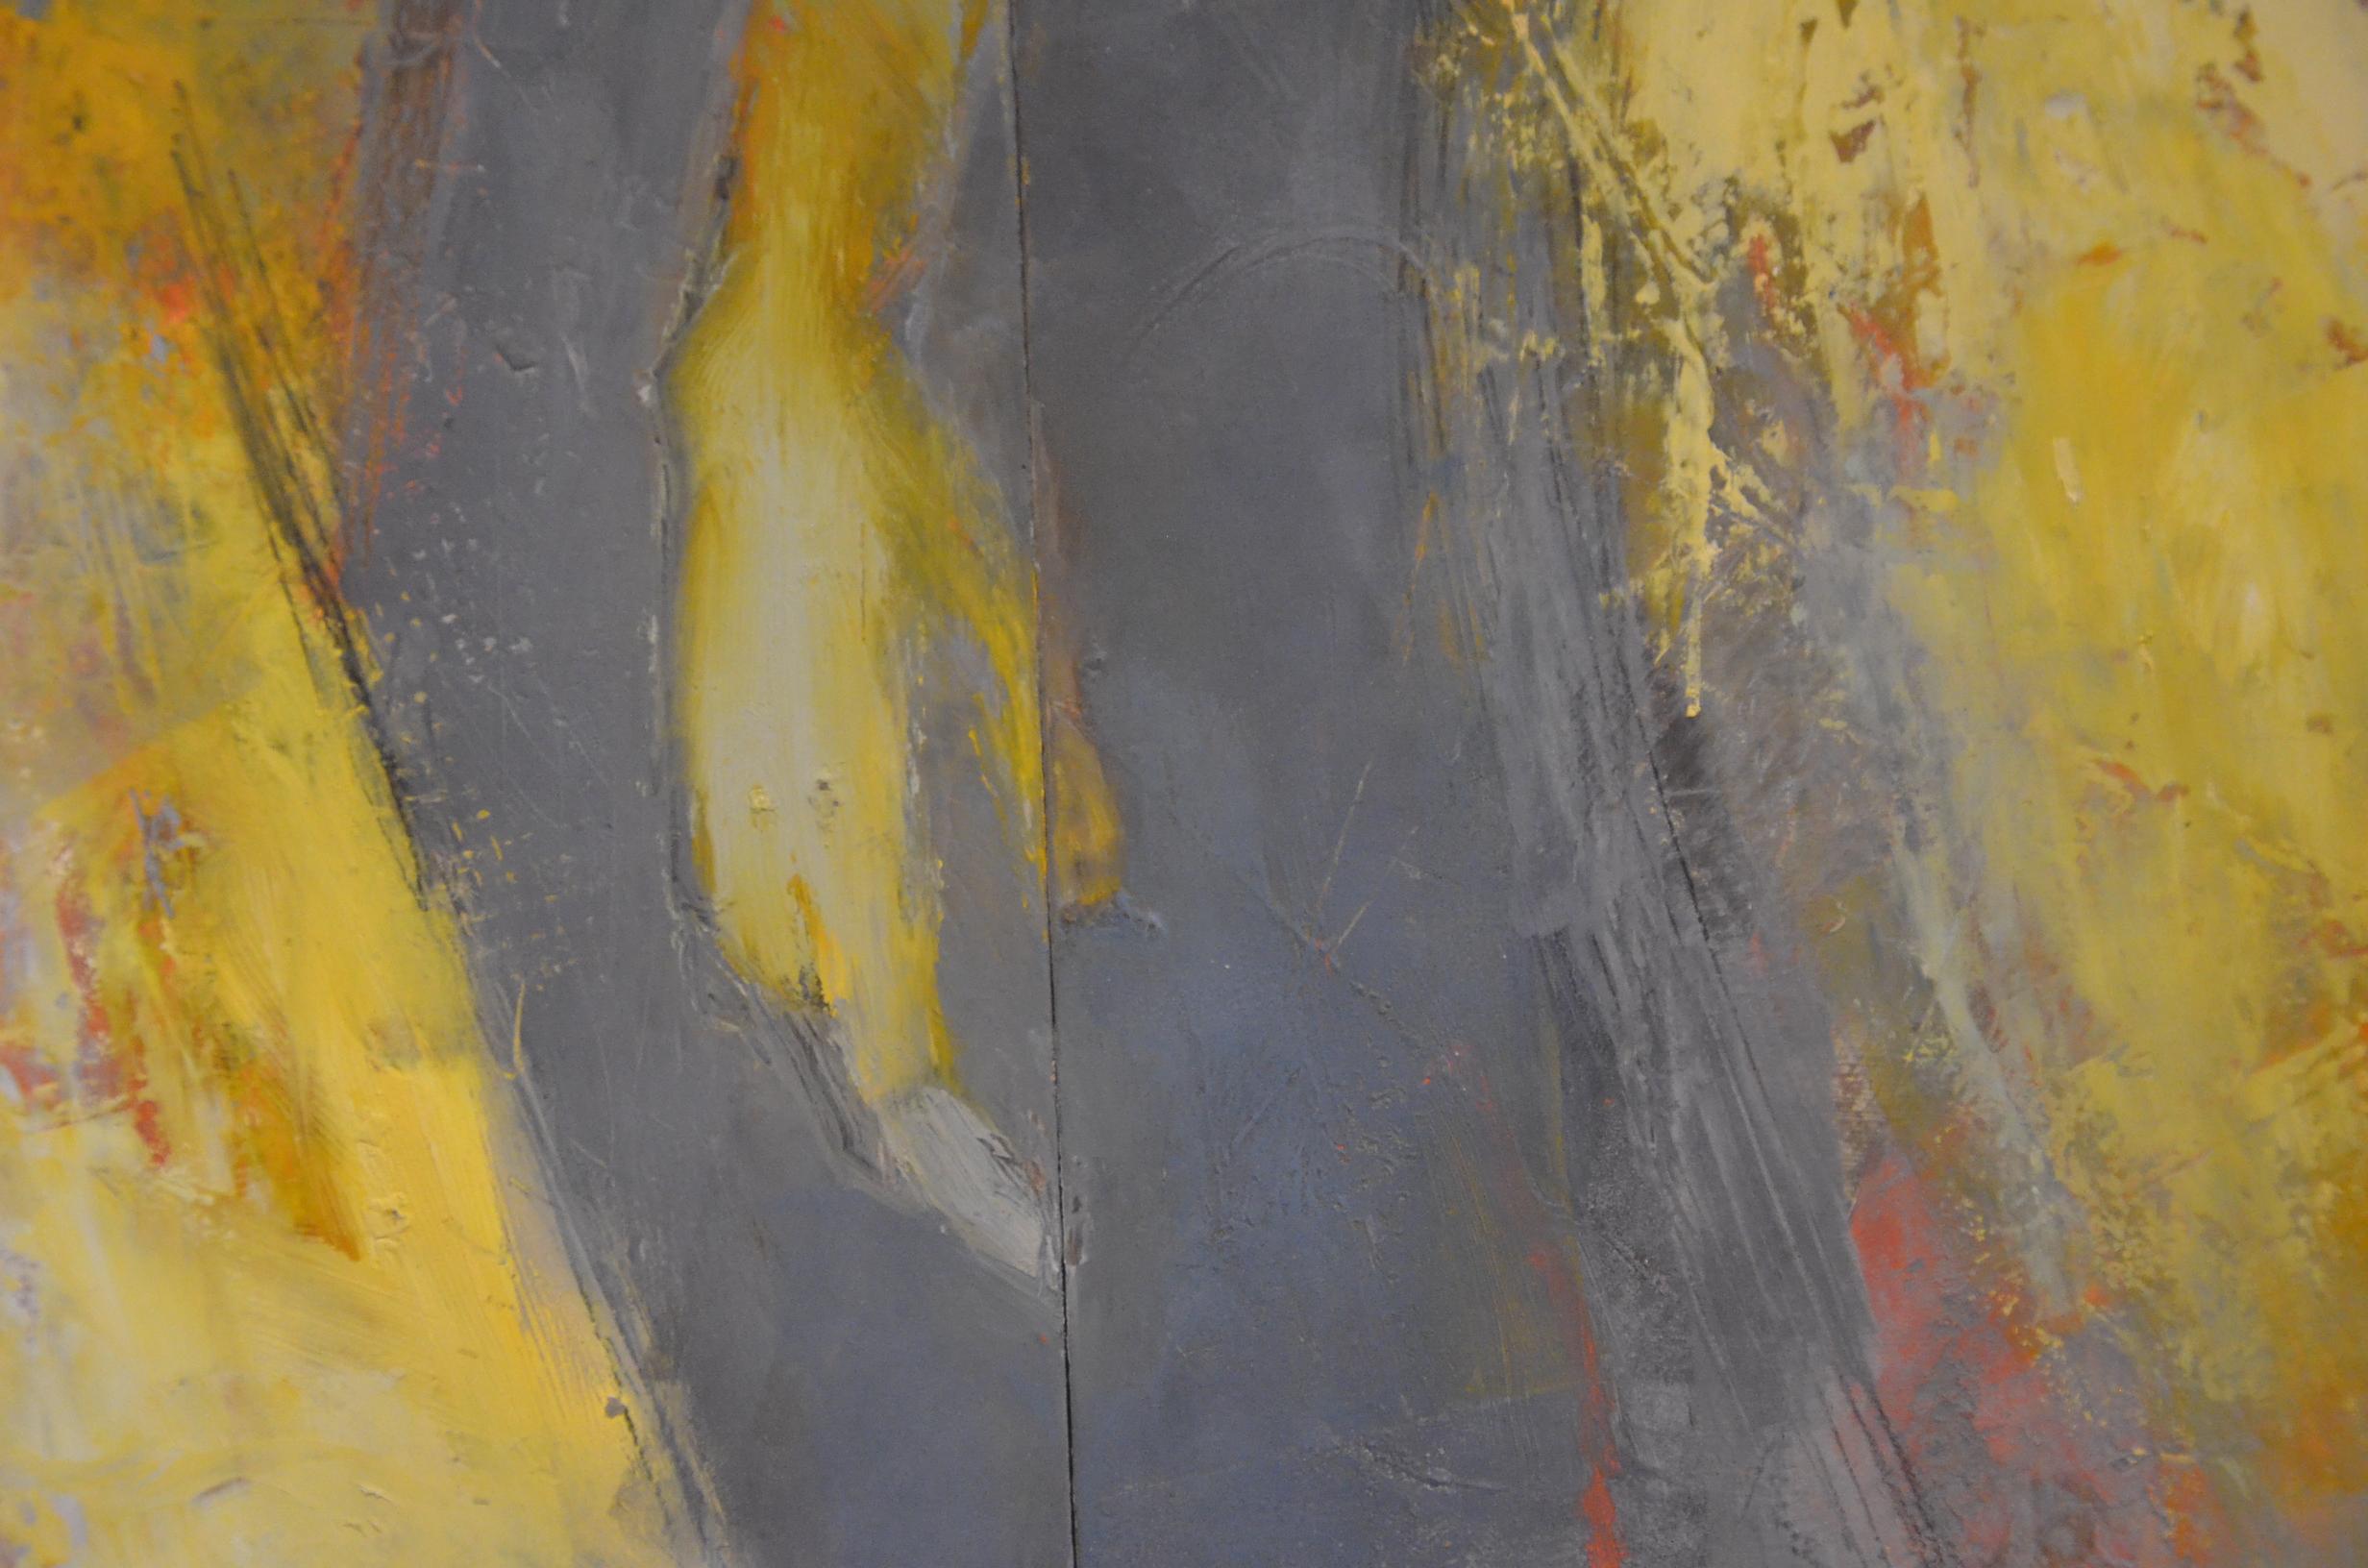 Riddle, Mid Century Female Figure in Light, Abstract, Neutral Tones - Painting by Melinda Cootsona